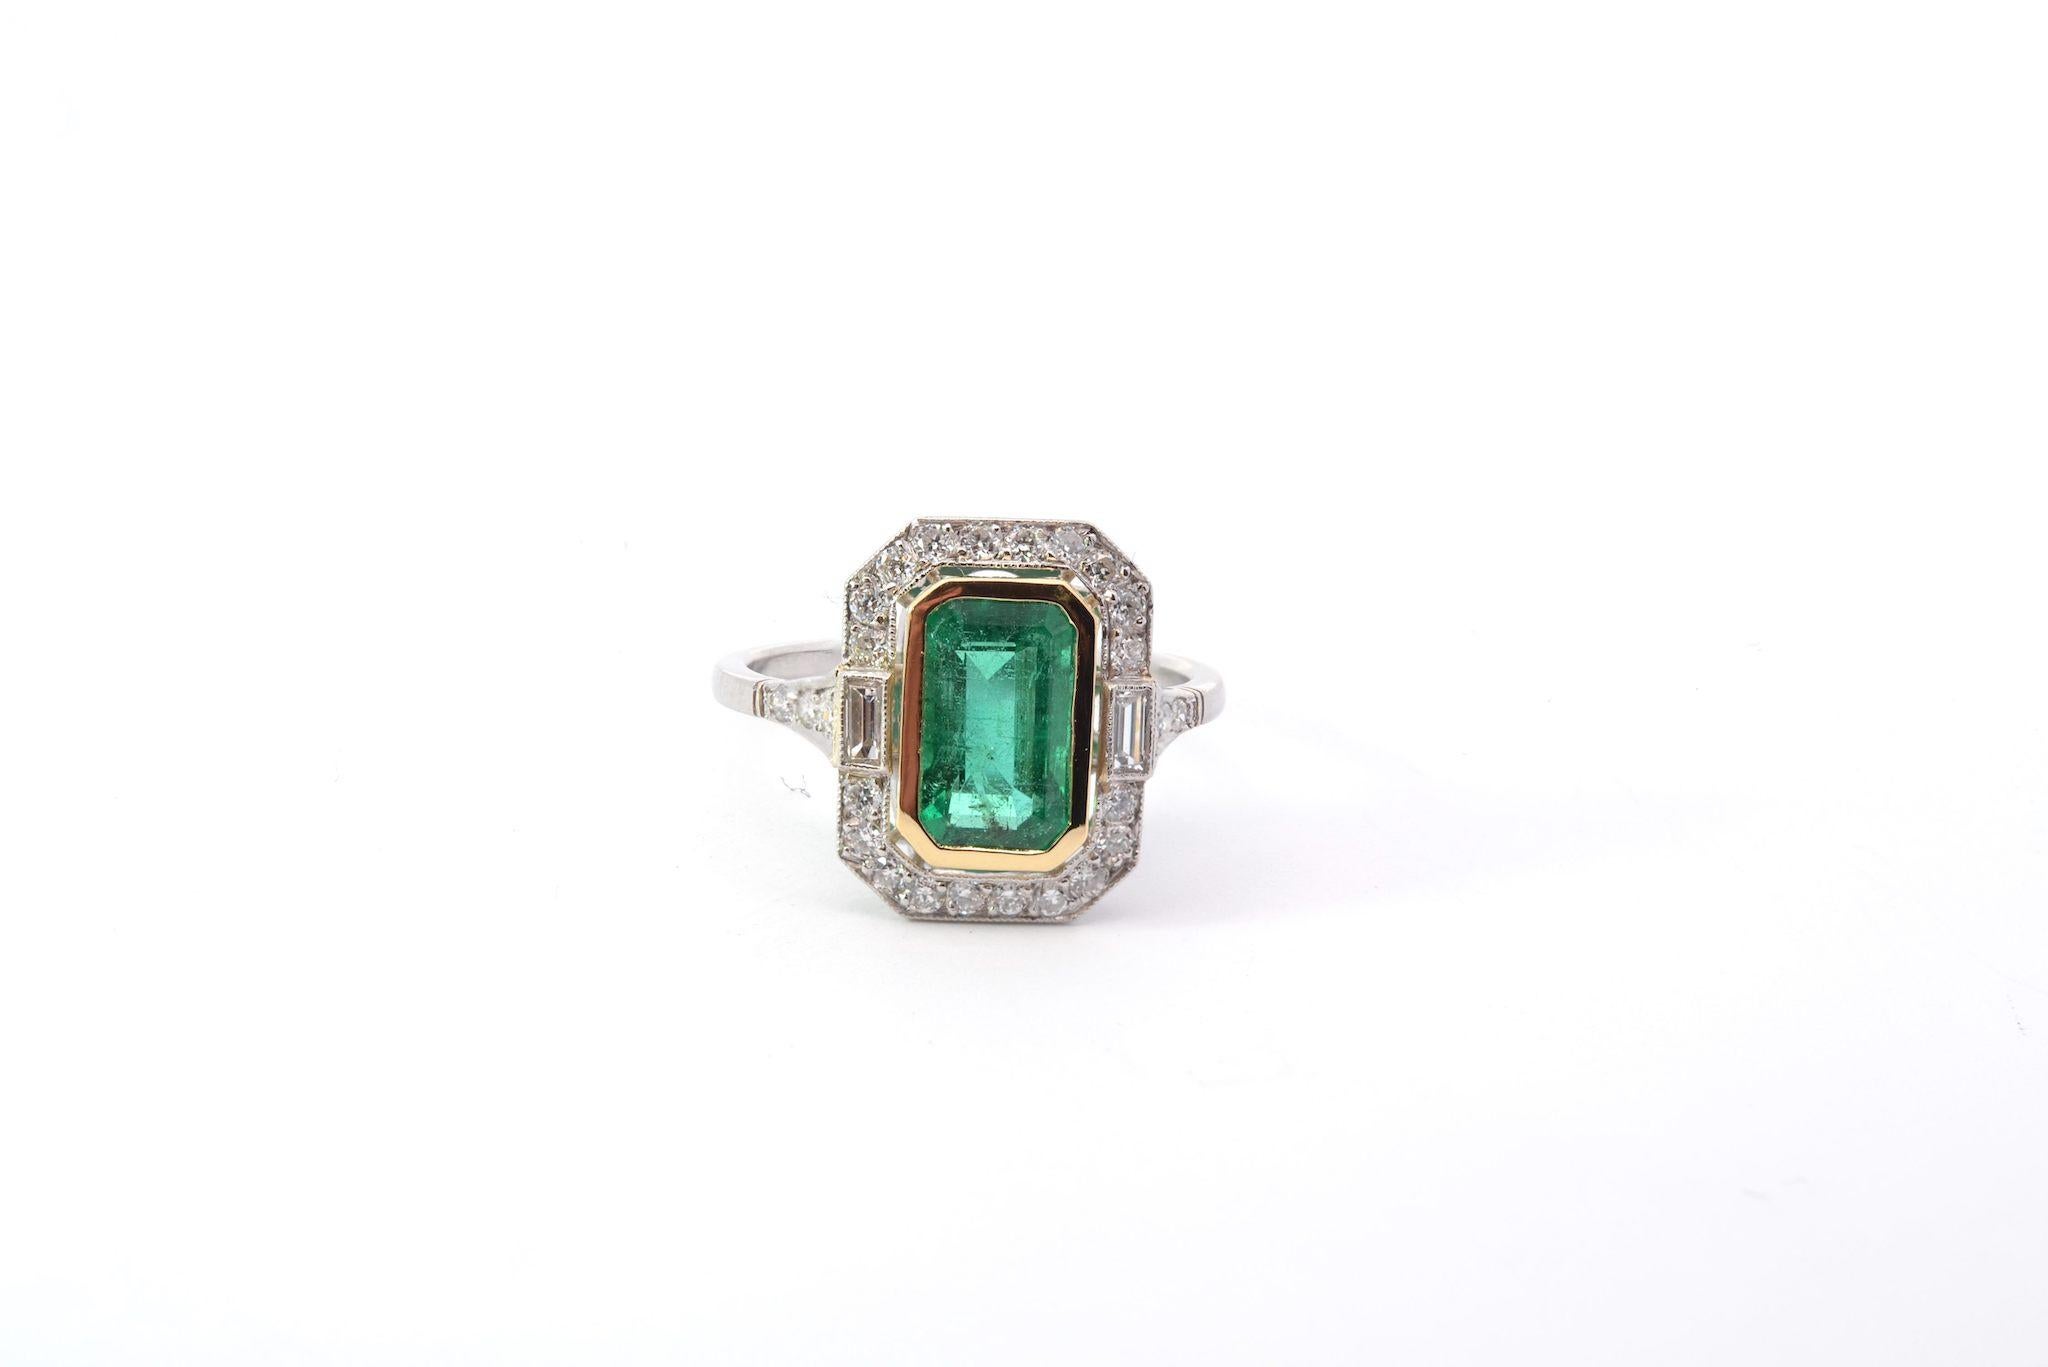 Stones: Zambian Emerald: 1.79 cts, 26 diamonds: 0.45ct, 2 baguette diamonds: 0.15ct
Material: Platinum and 18k yellow gold
Dimensions: 1.5cm x 1.2cm
Weight: 4.1g
Period: Recent, art deco style (handmade)
Size: 53 (free sizing)
Certificate
Ref. :